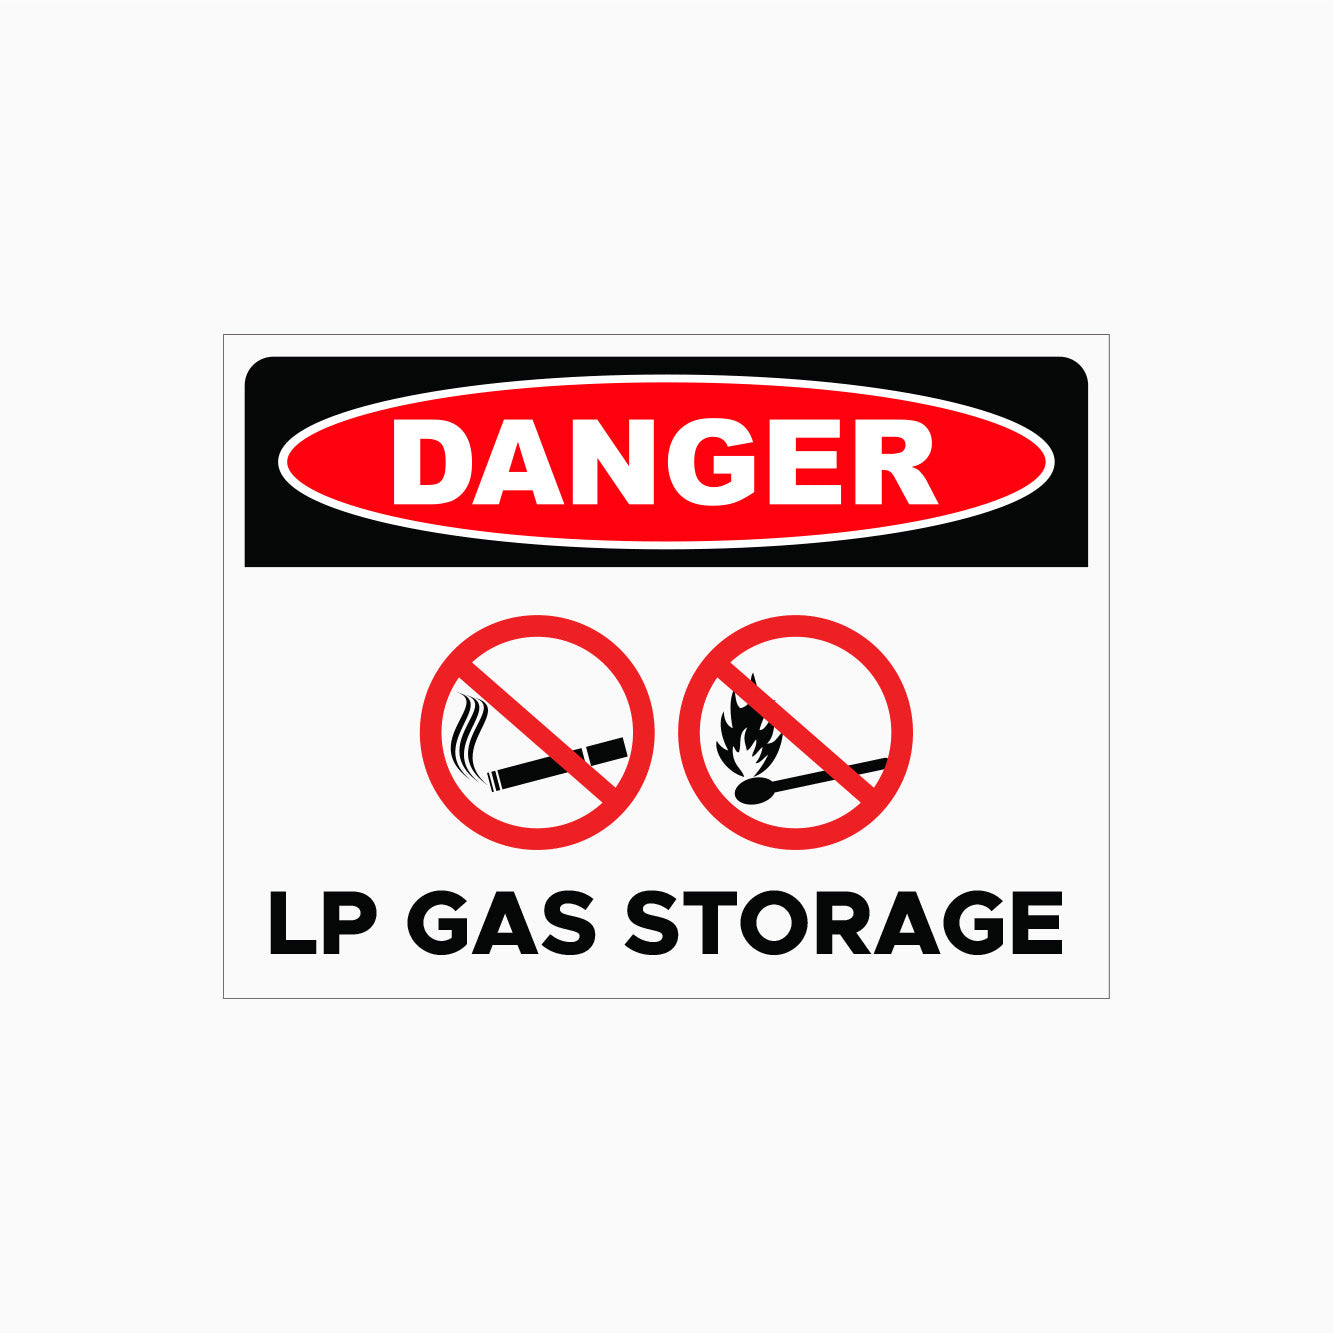 DANGER SIGNS AT GET SIGNS IN AUSTRALIA - LP GAS STORAGE SIGN